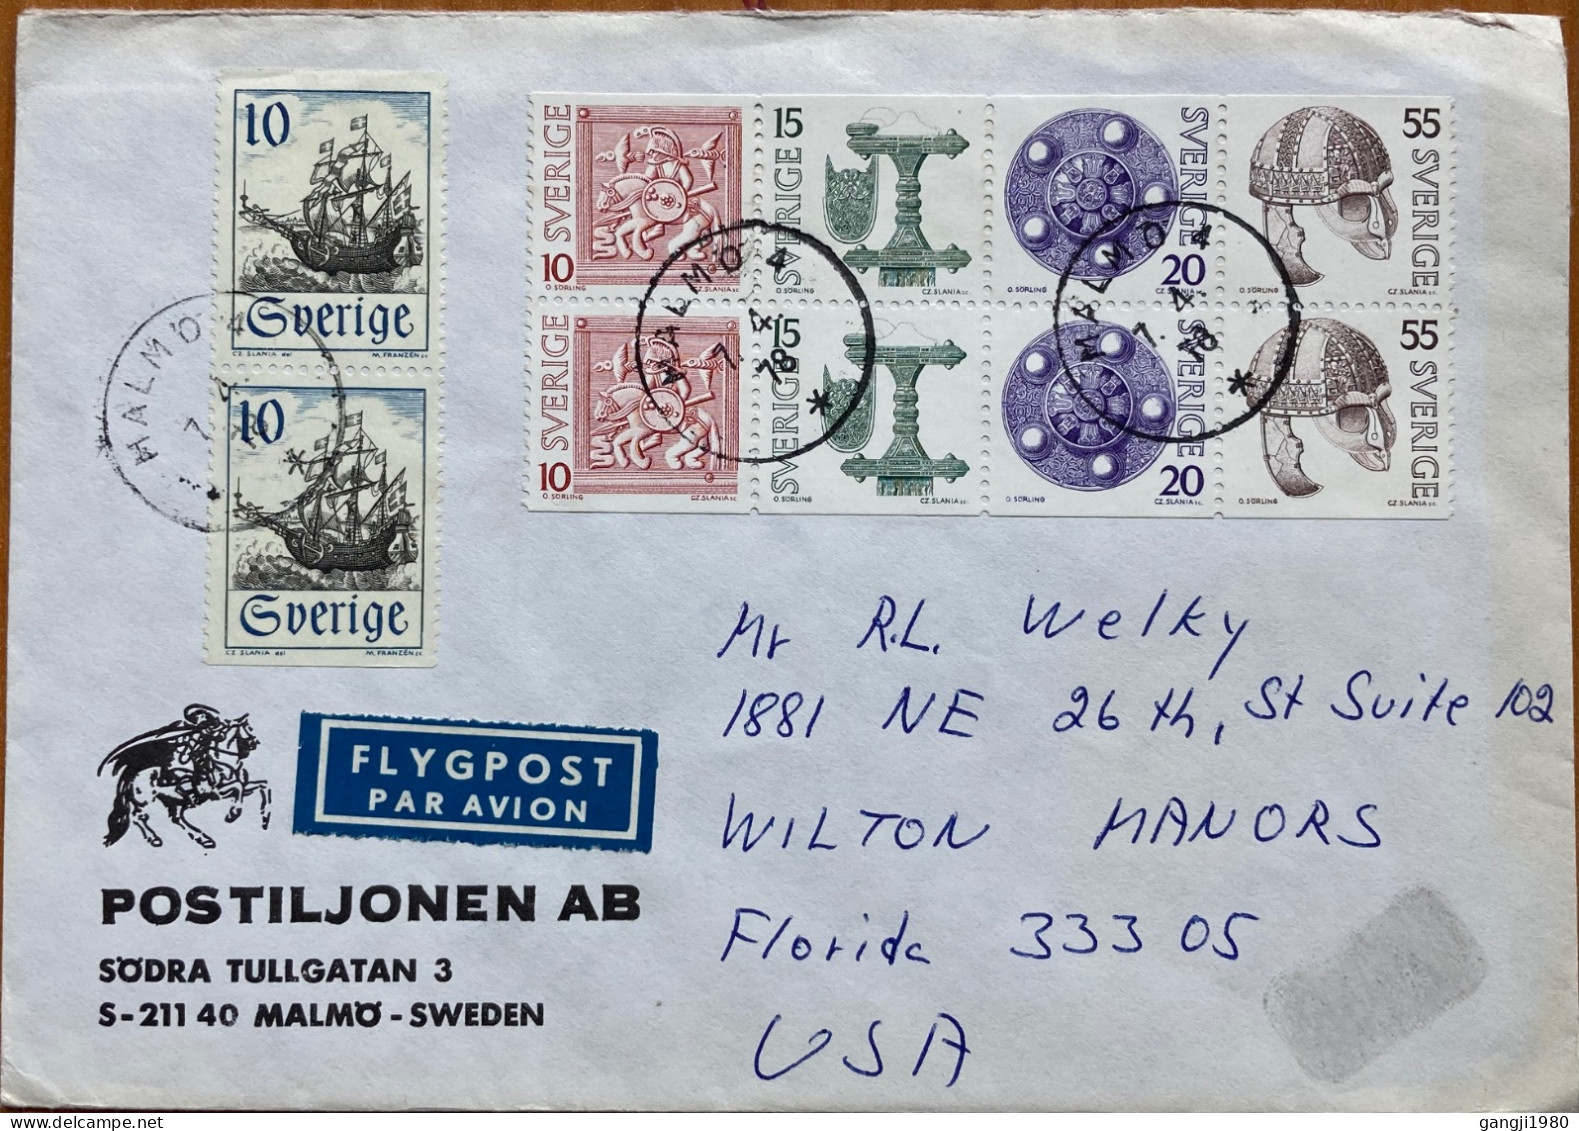 SWEDEN 1978, ILLUSTRATE COVER, USED TO USA, ARCHAEOLOGICAL DISCOVERY, BOOKLET PANE, MULTI 10 STAMP, HELMET, SHIELD, SHIP - Lettres & Documents